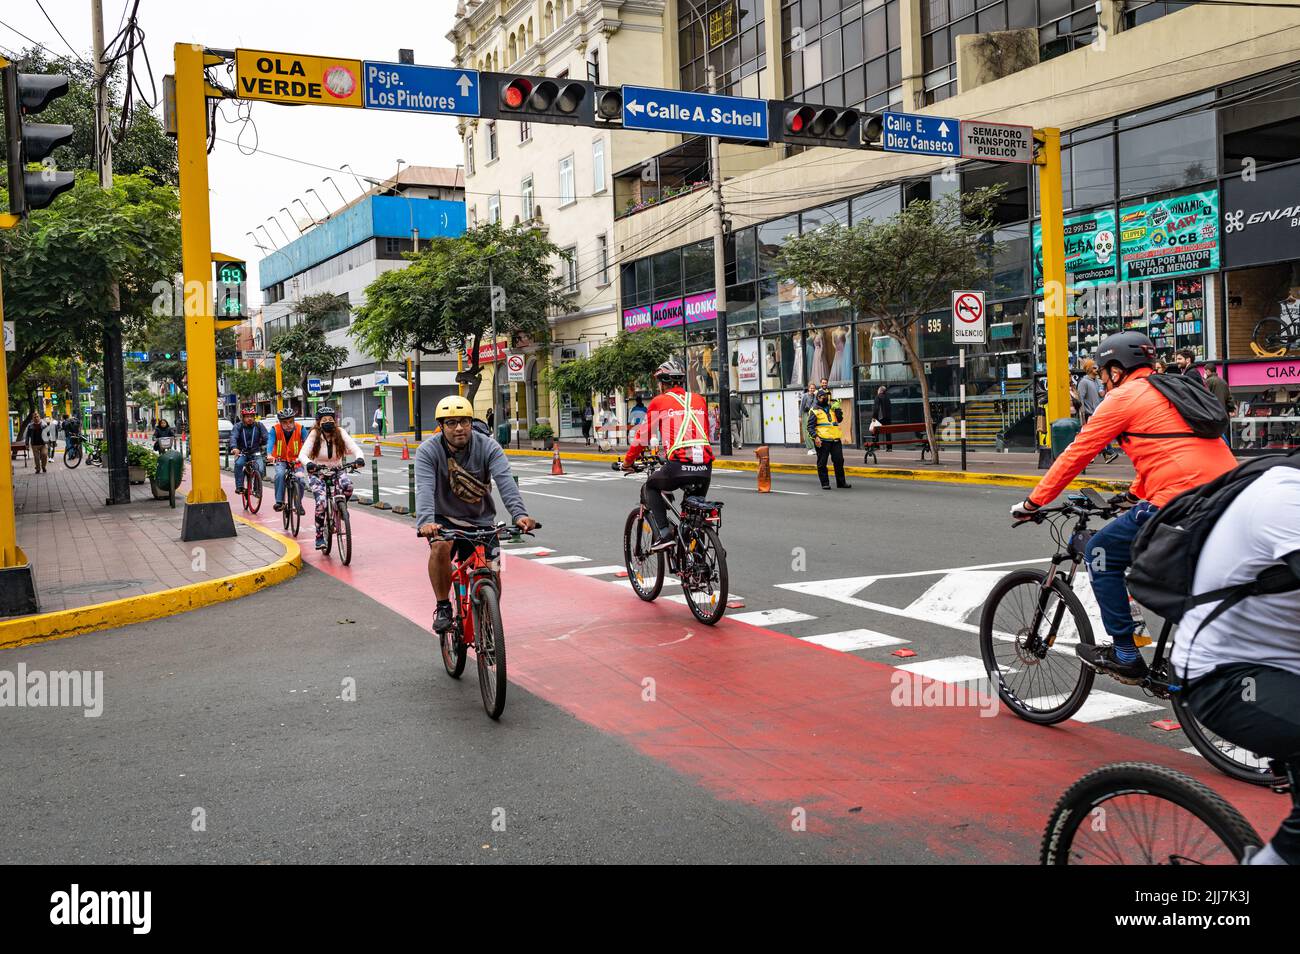 Bikers riding on Av. Jose Larco in Miraflores.  Bike lanes are located throughout the busy city for transportation Stock Photo